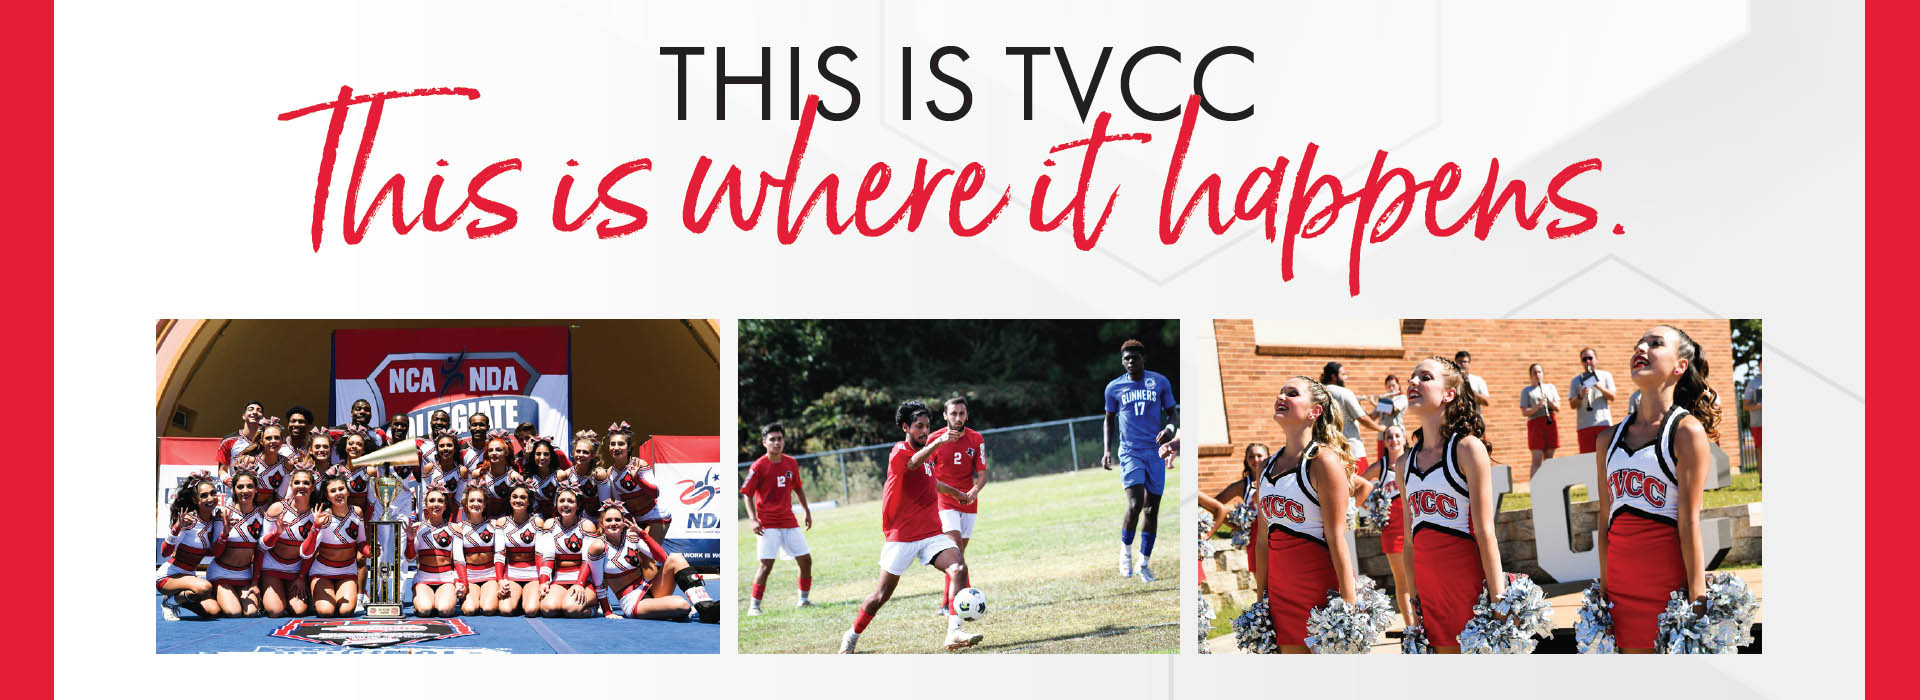 This is TVCC - This is where it happens